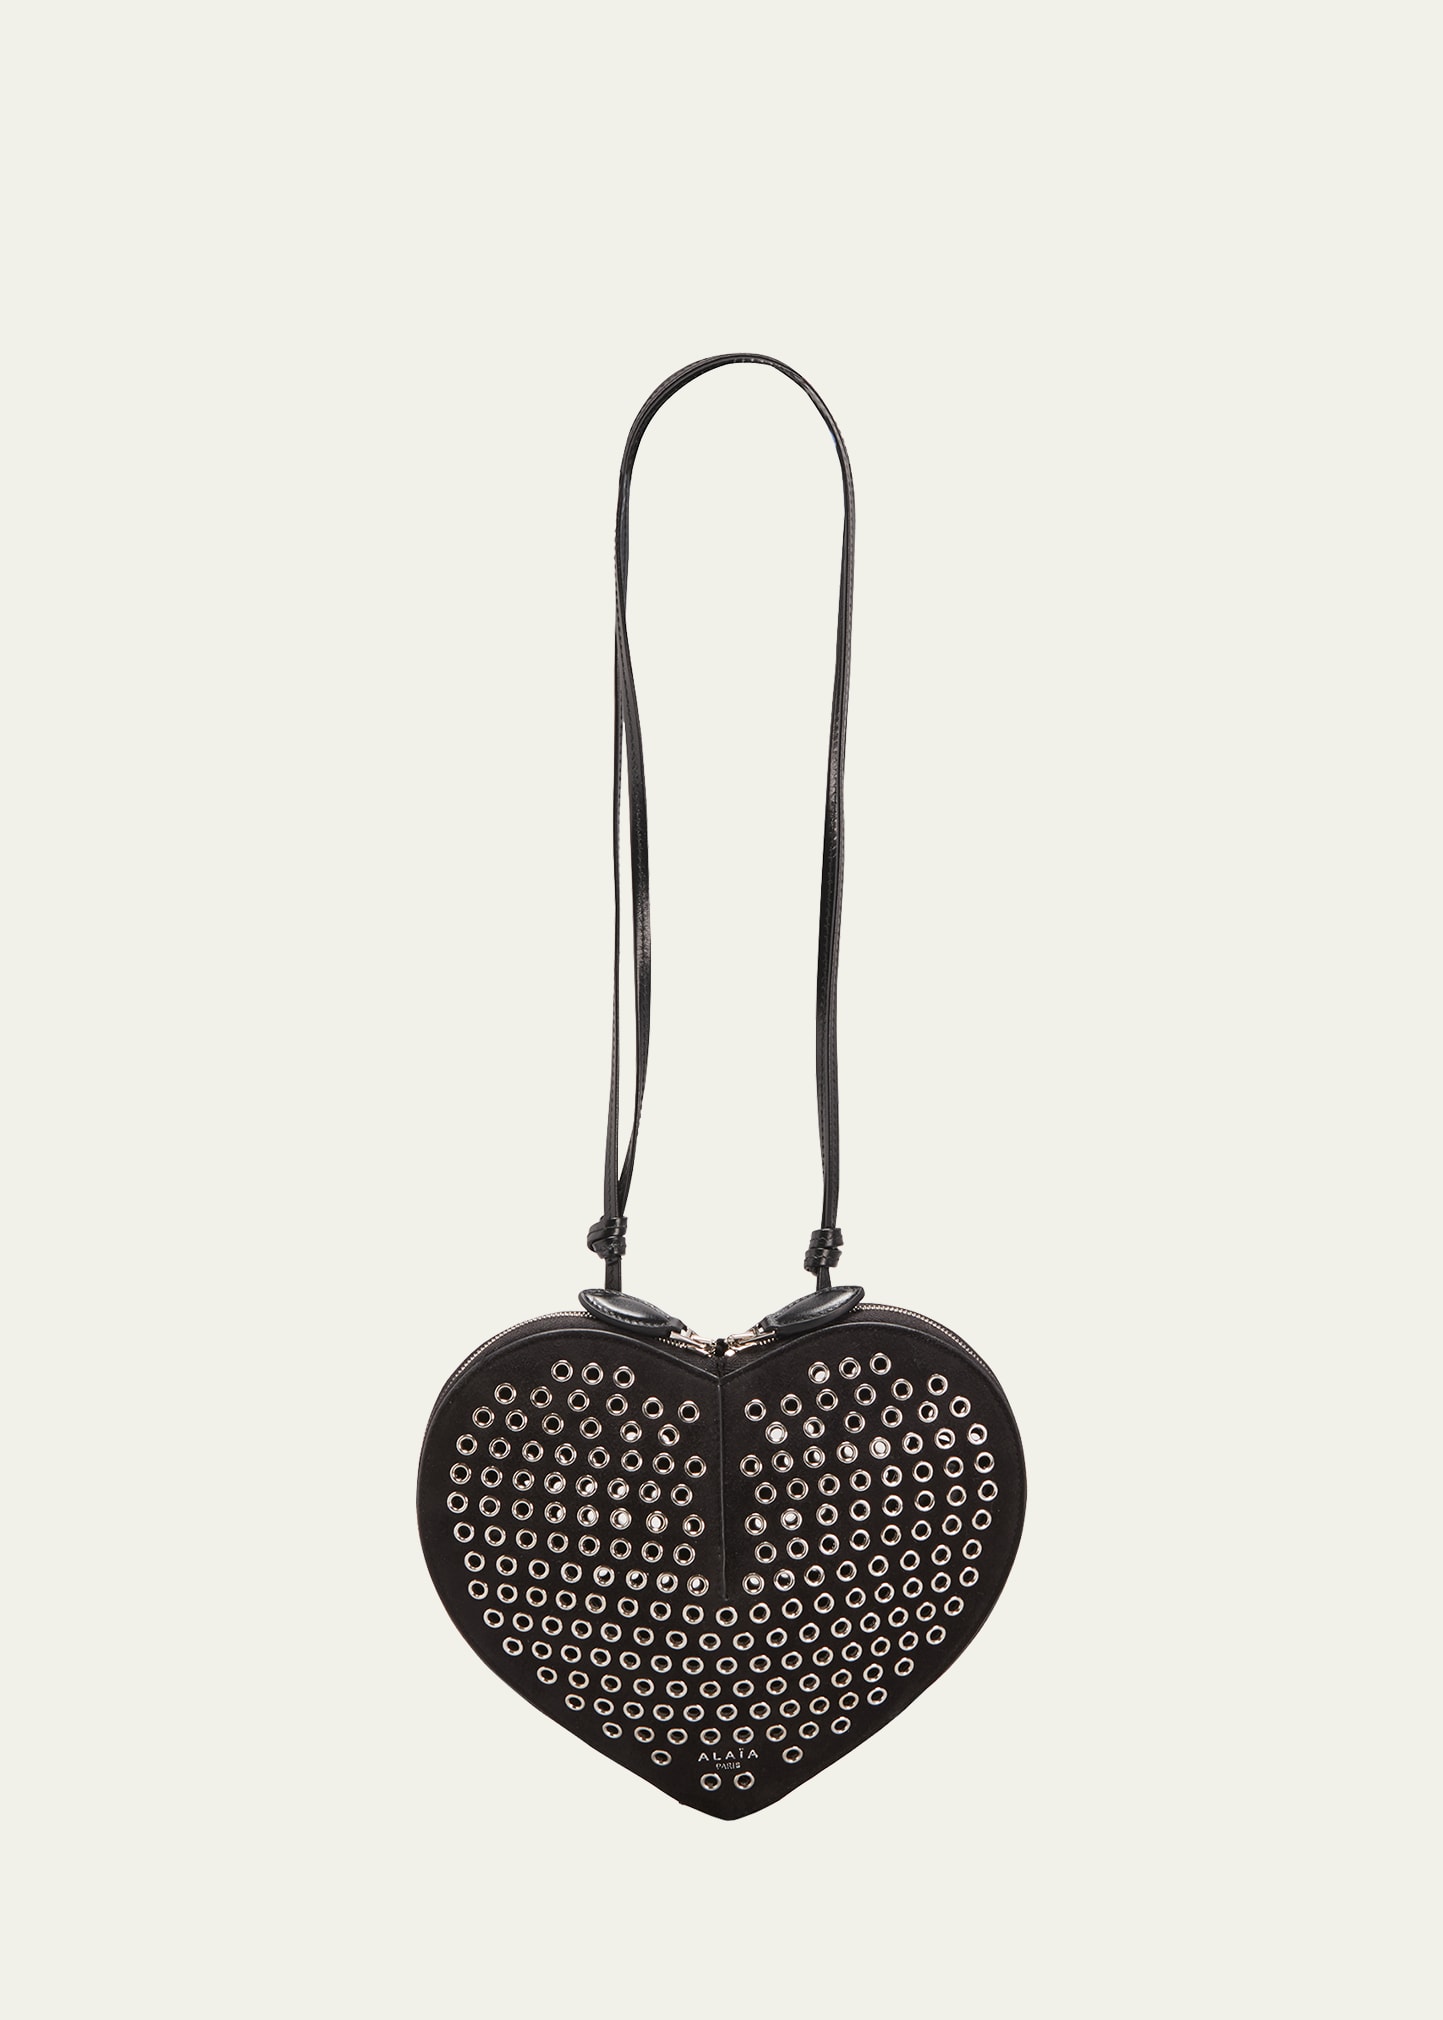 ALAÏA LE COEUR CROSSBODY BAG IN LUX LEATHER WITH GROMMETS